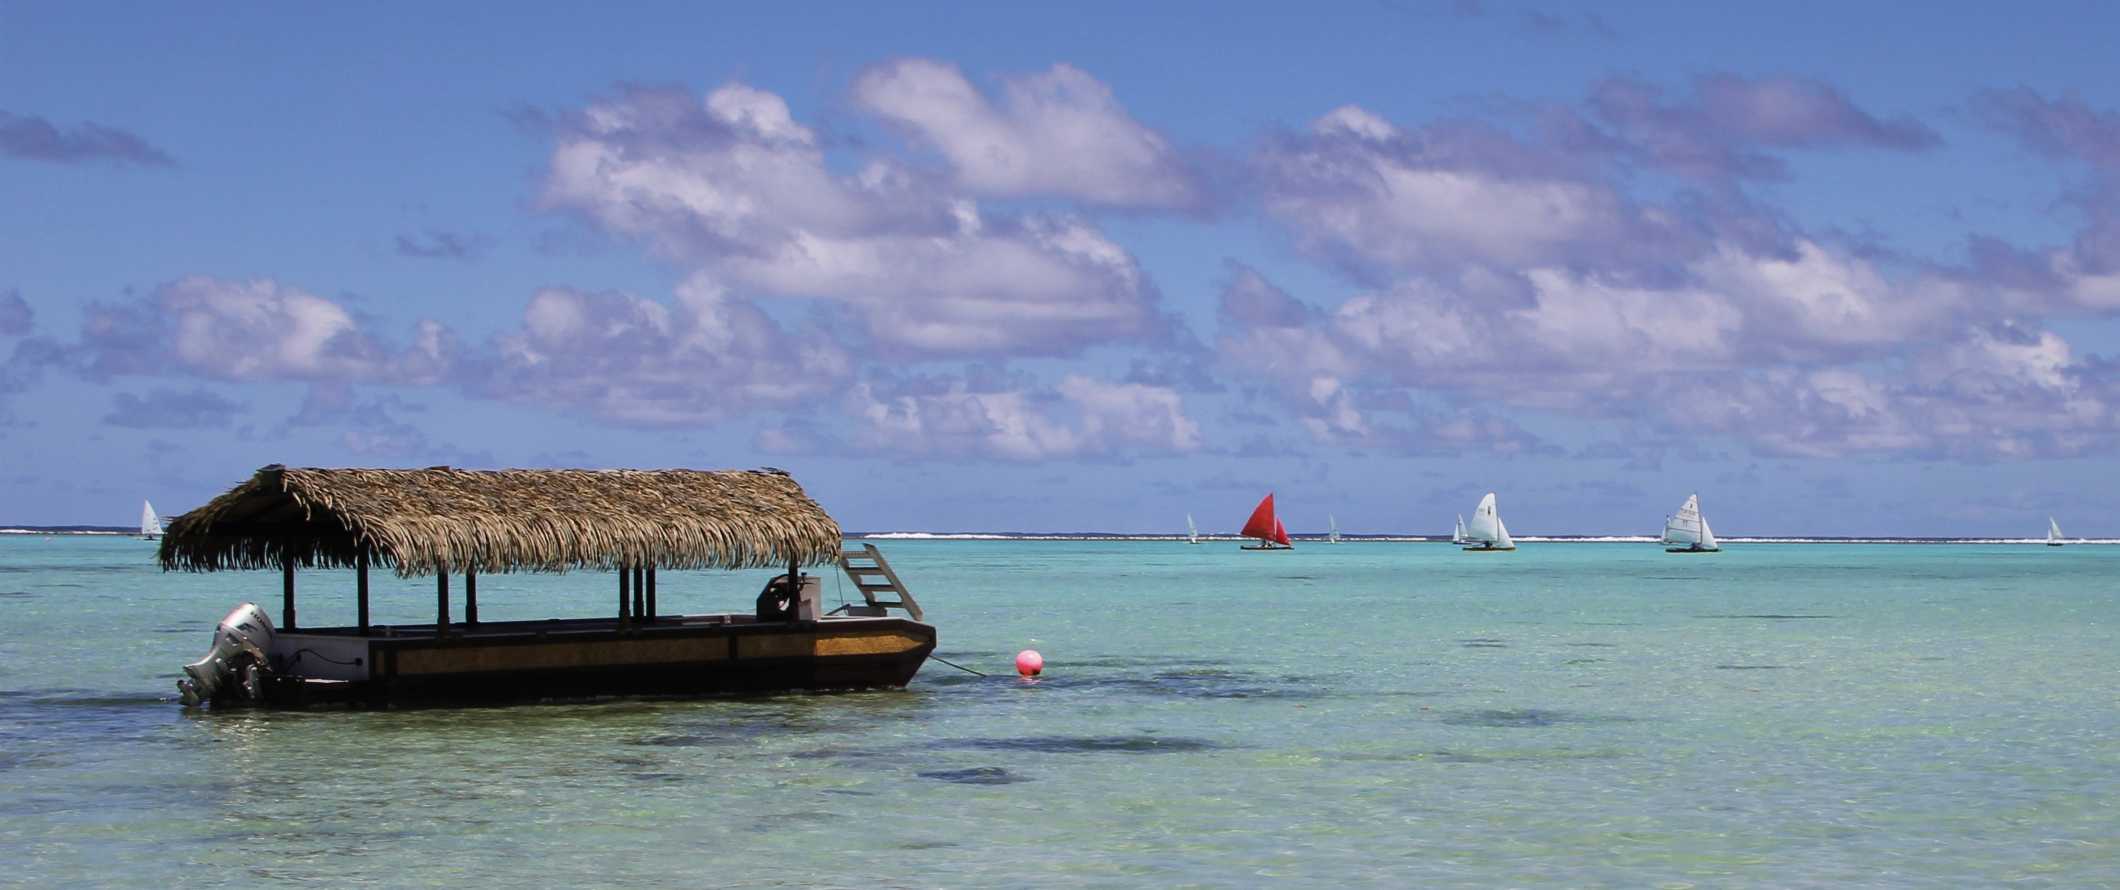 Boat with a thatched roof parked in the clear waters of the Cook Islands